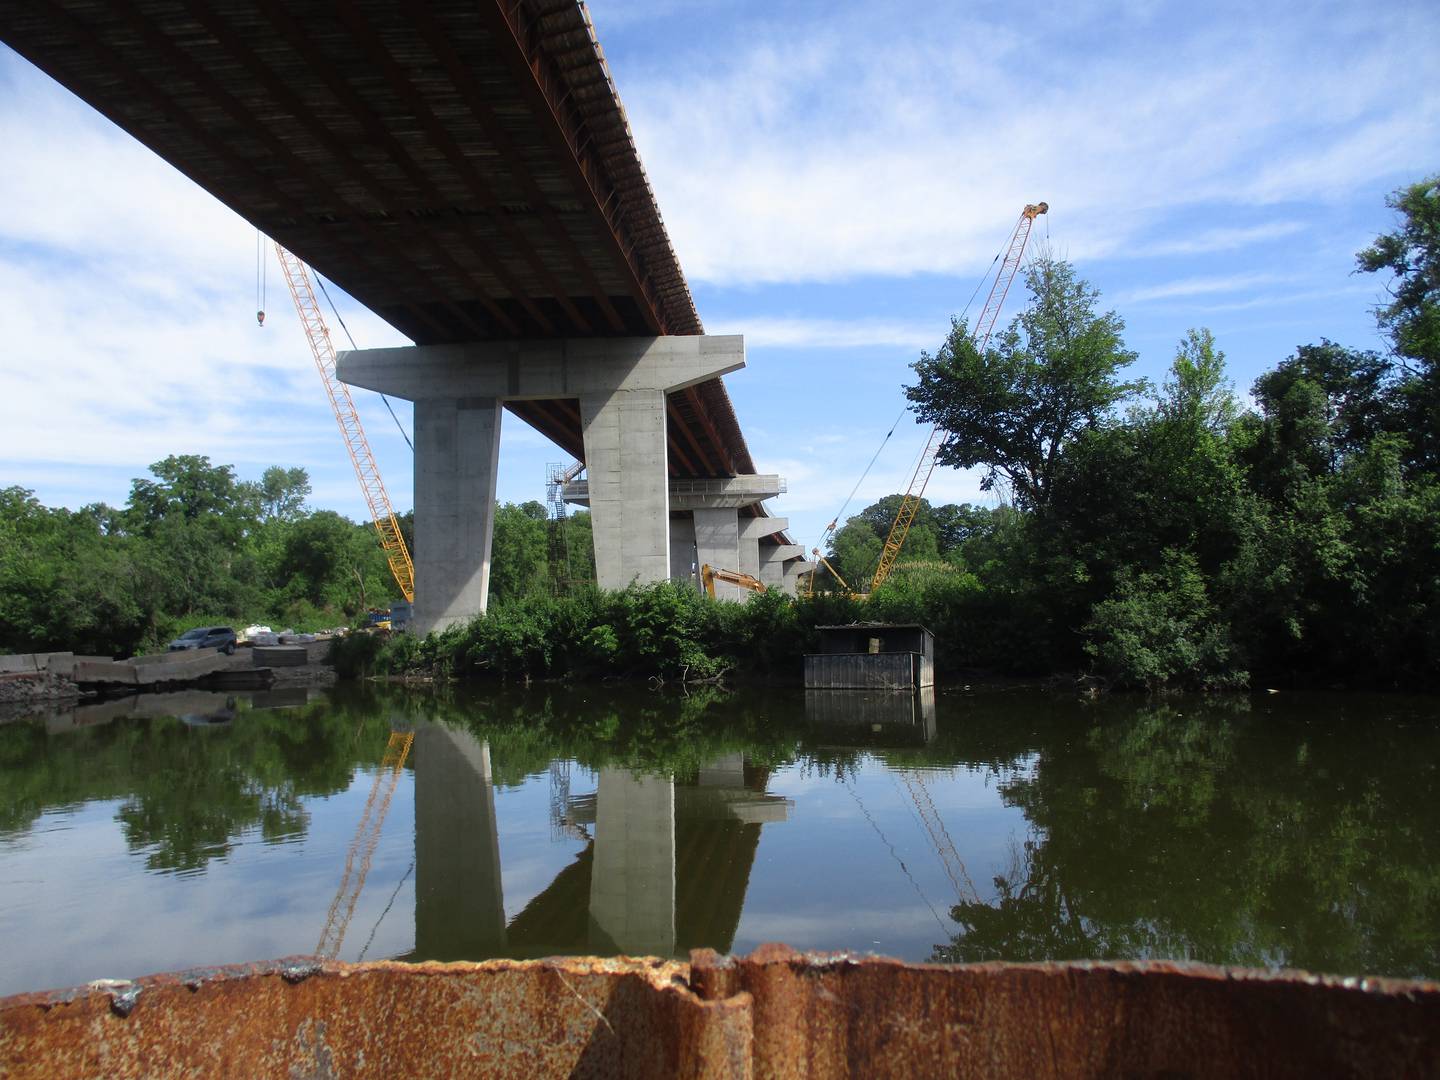 One of the giant concrete piers supporting the Eldamain Road bridge is reflected in the still waters created by a coffer dam used for the construction project. (Mark Foster -- mfoster@shawmedia.com)